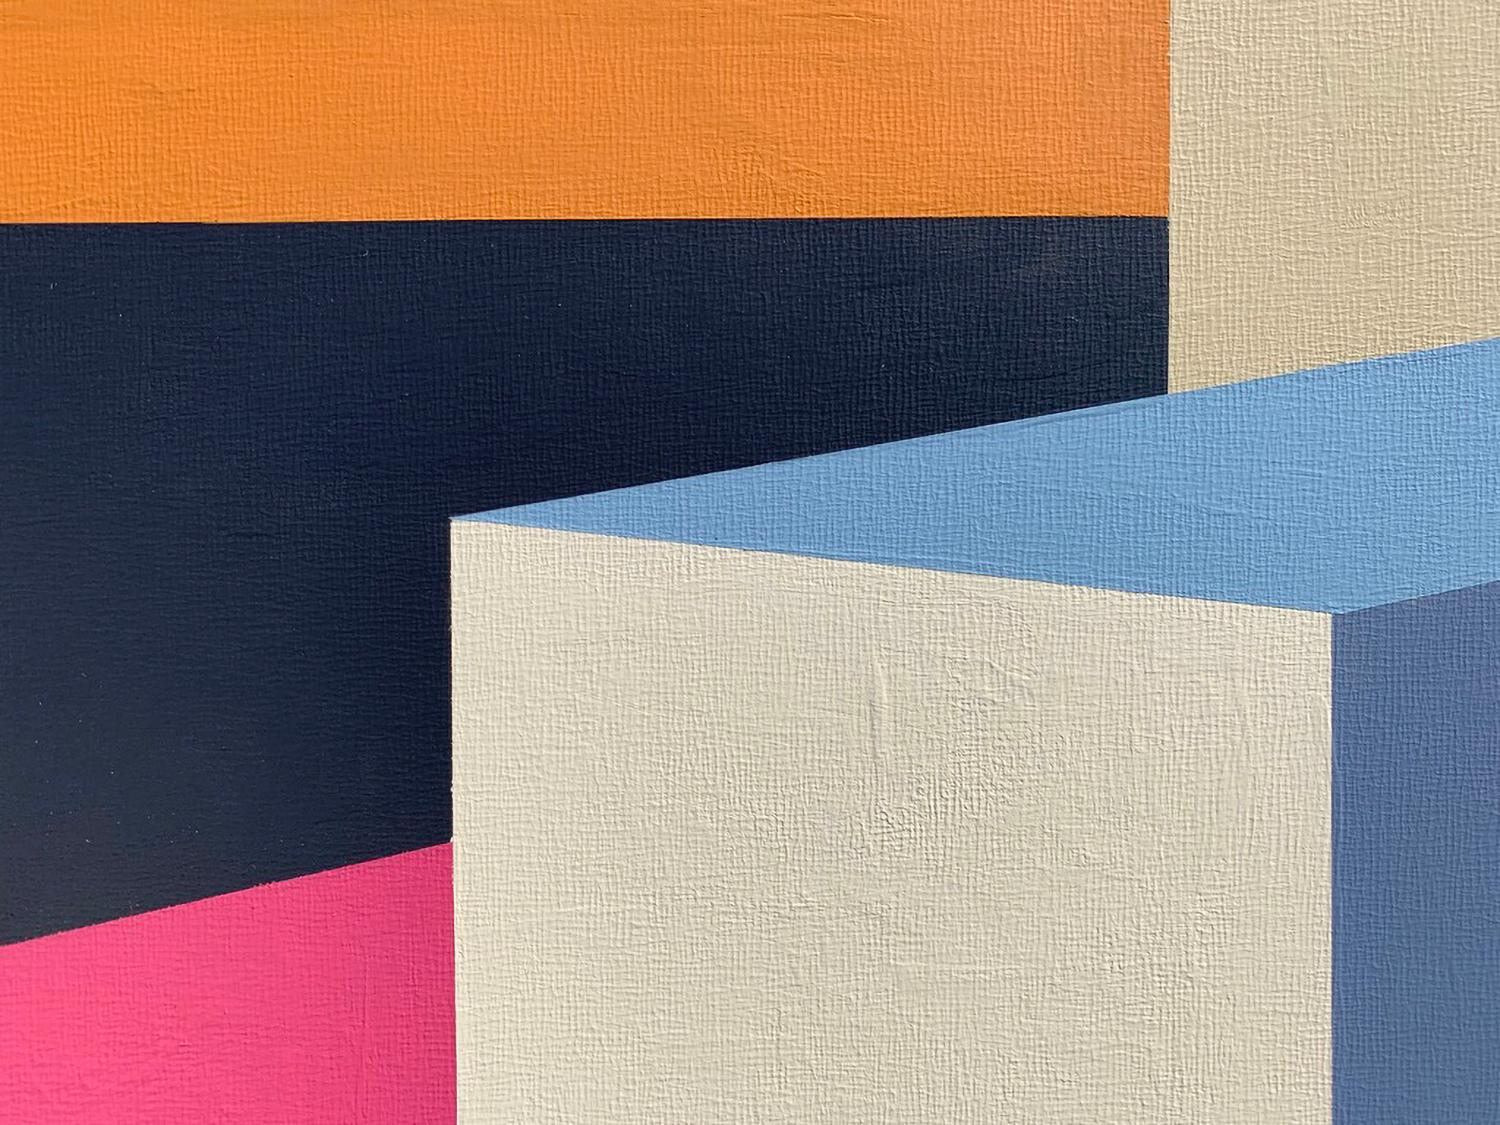 <p>Artist Comments<br>Artist Craig Rouse depicts a minimalist abstract scene expressed with a limited color-blocked palette of 14 colors. Part of his NAR series, meaning No Assembly Required. He bases it on a collection of stacked paper cubes